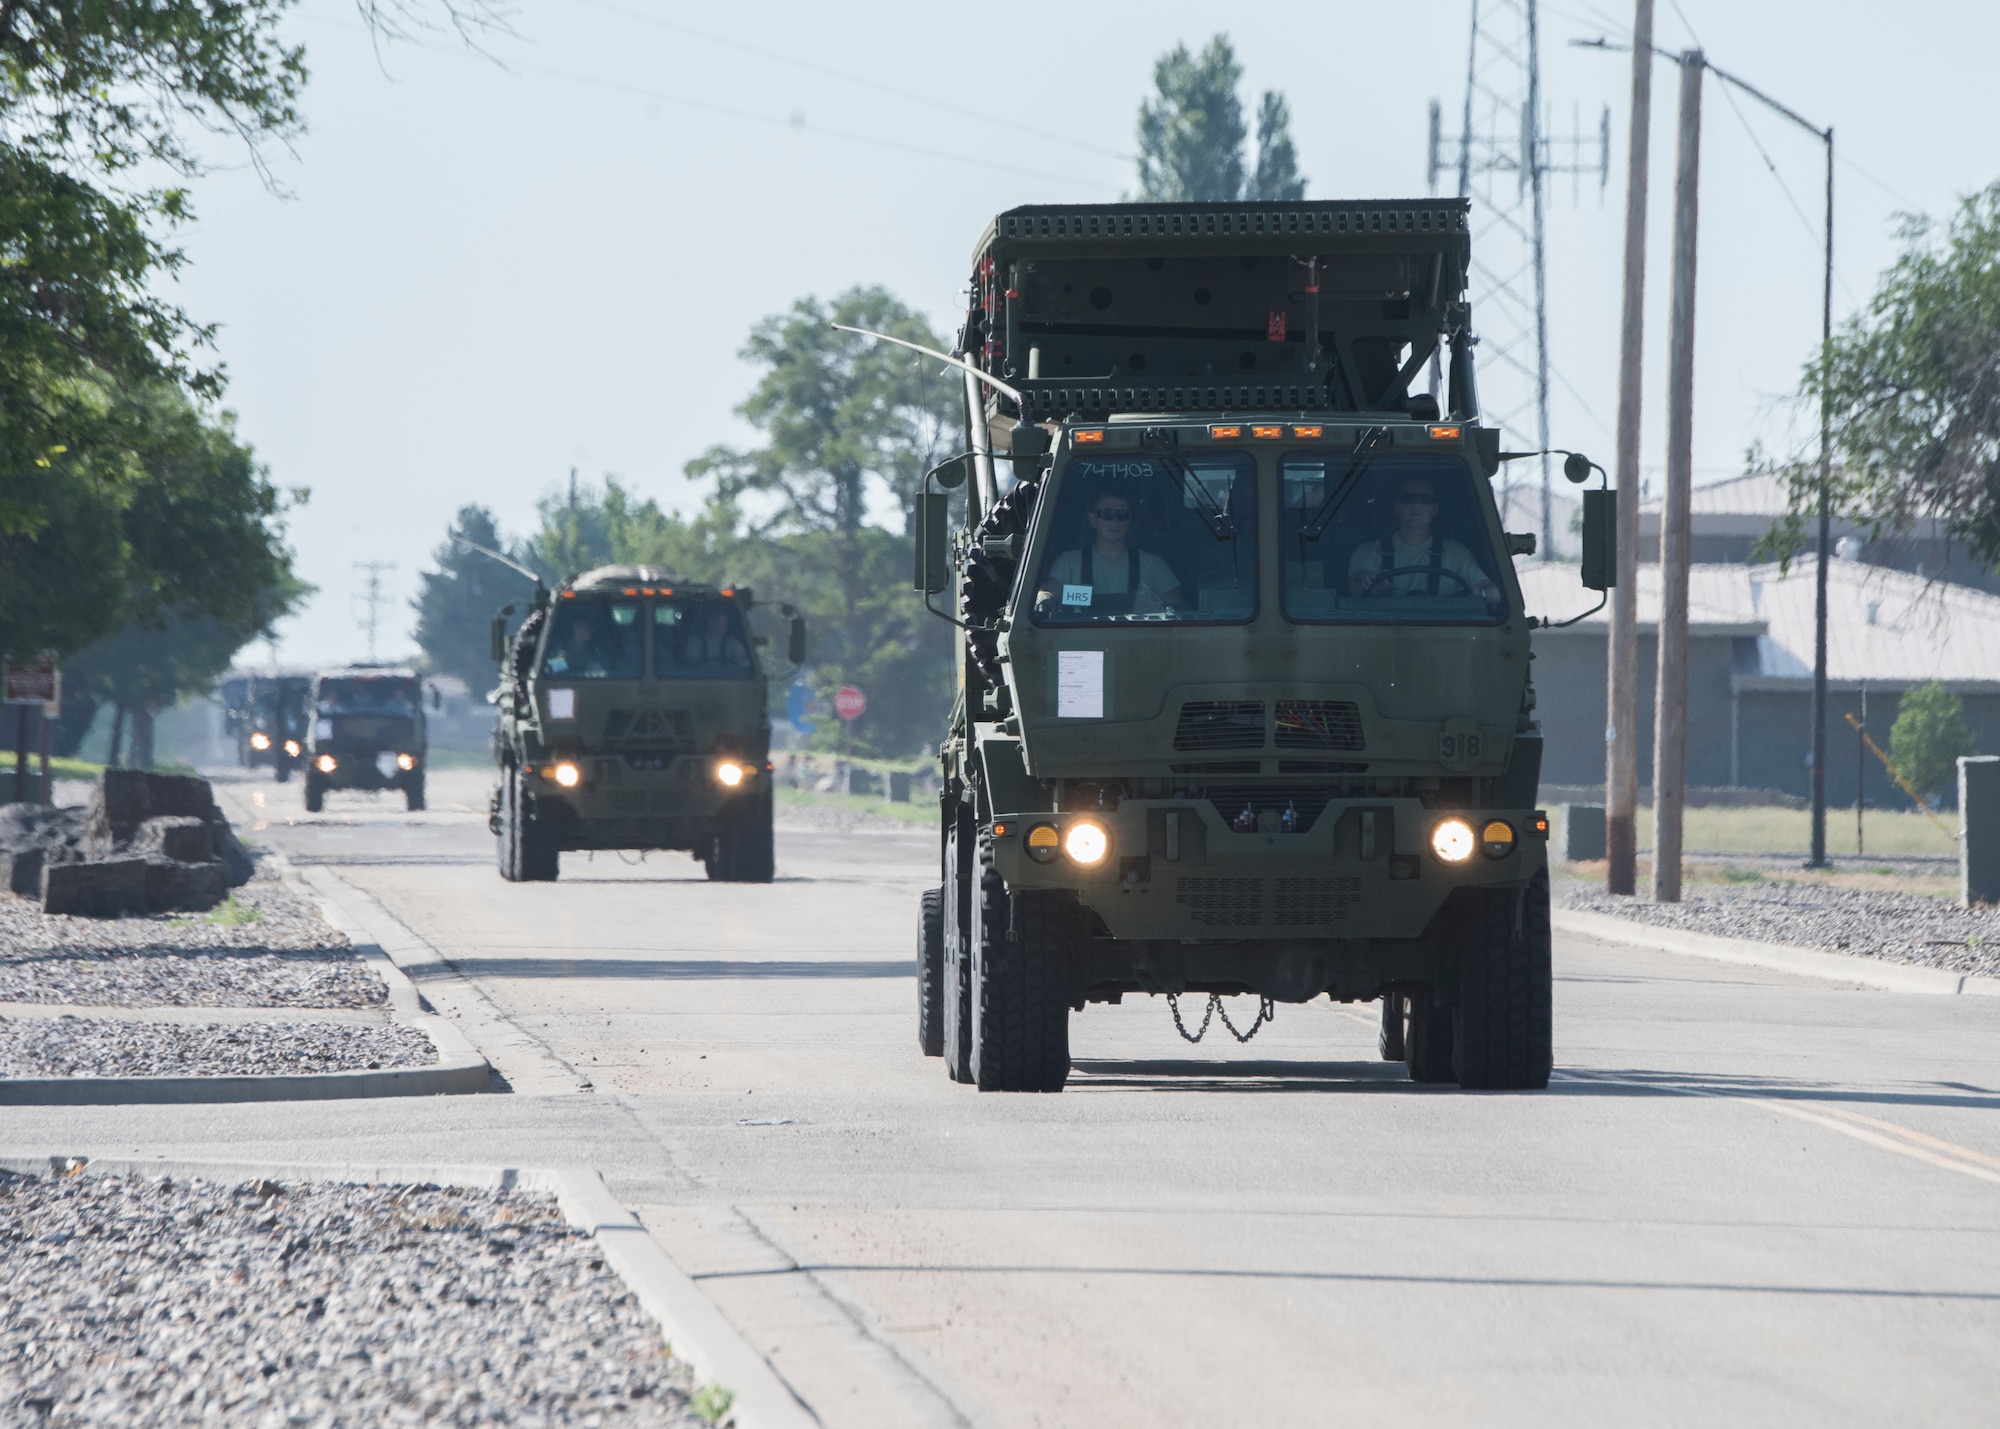 Airmen from the 726th Air Control Squadron travel in a convoy as they conduct their deployment readiness exercise July 14, 2019, at Mountain Home Air Force Base, Idaho. The 726th ACS conducts deployment exercises in order to increase their mission readiness. (U.S. Air Force photo by Senior Airman Tyrell Hall)